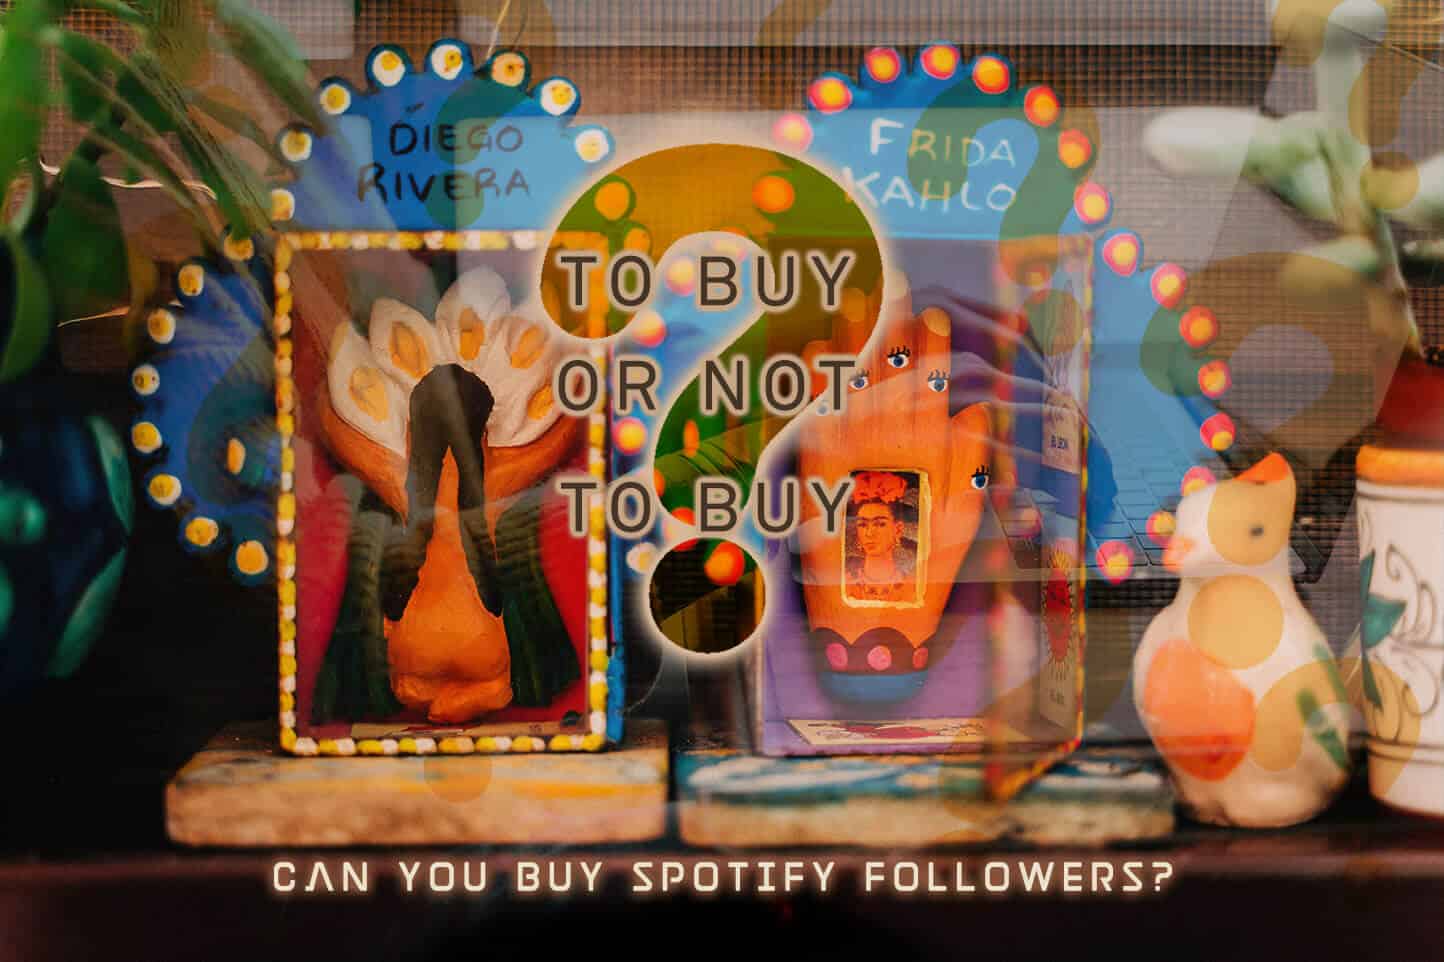 image-with-the-question-Can-you-buy-Spotify-followers